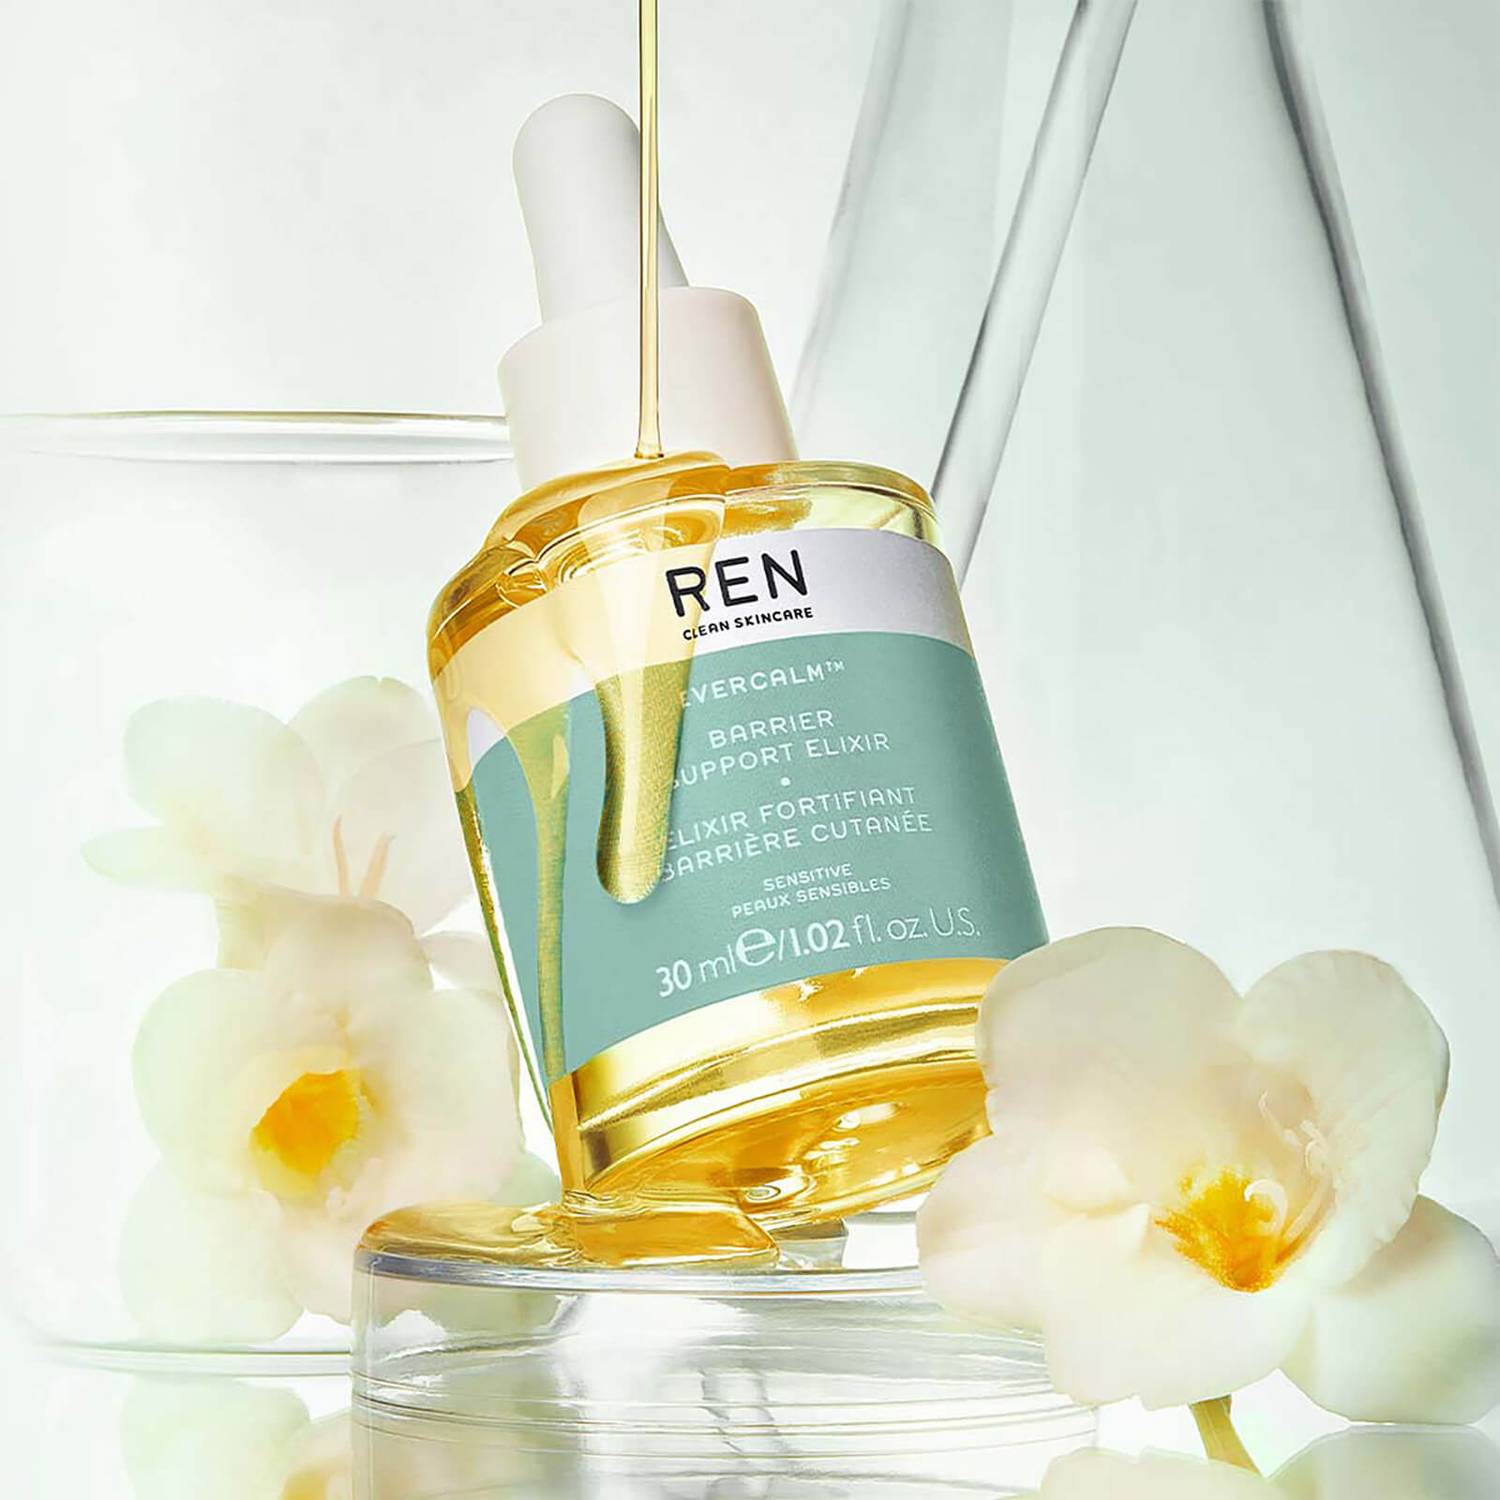 Evercalm Barrier Support Elixir by REN Skincare contains 100% naturally-sourced ingredients to quickly make skin feel suppler, calmer and hydrated. It is the best face oil. 